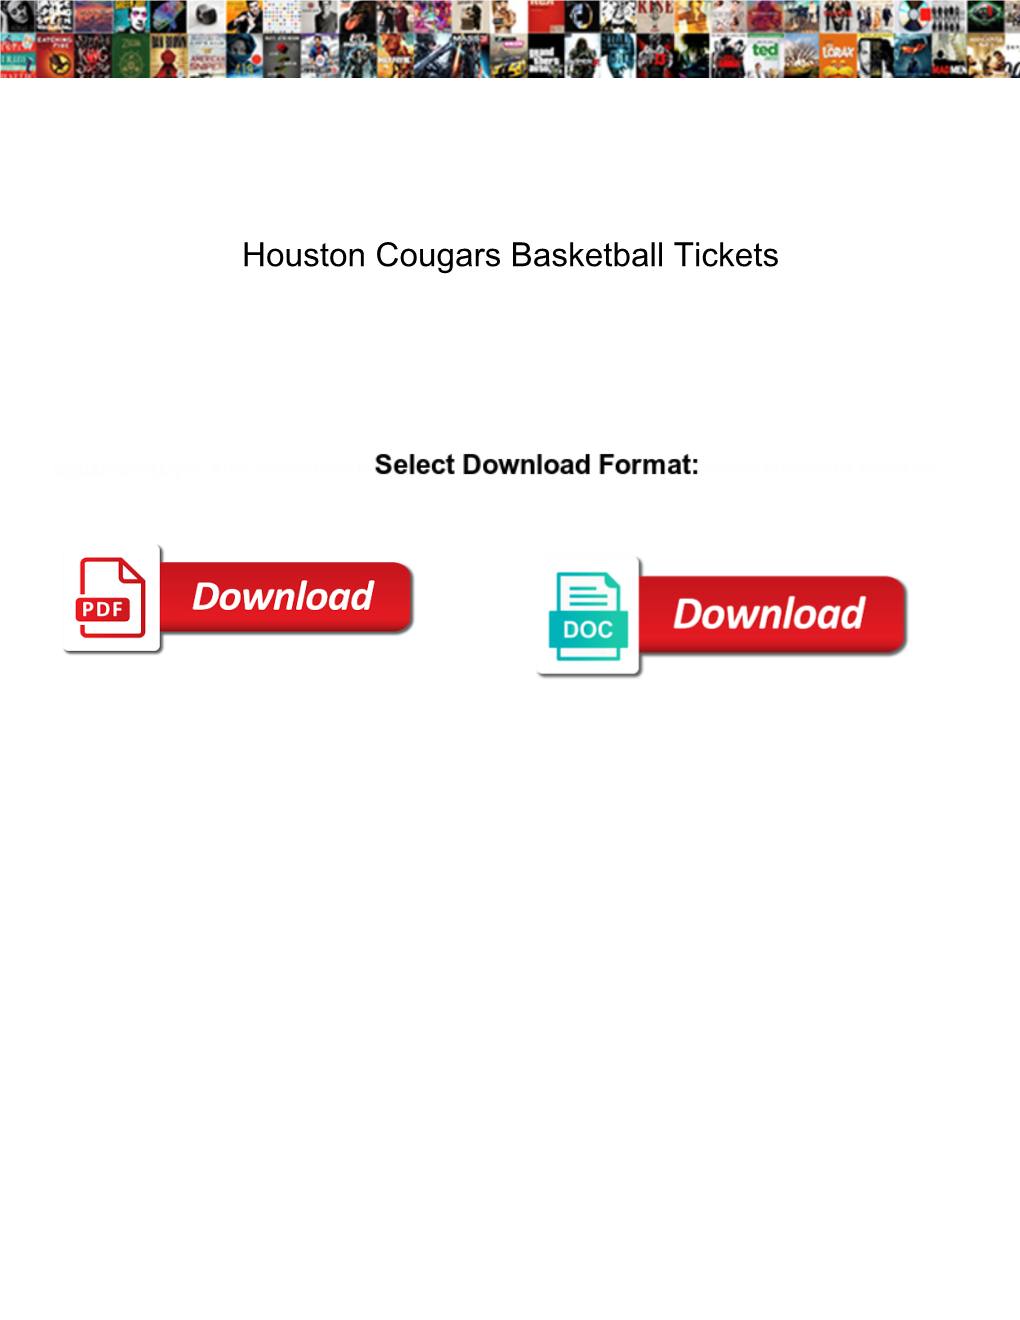 Houston Cougars Basketball Tickets